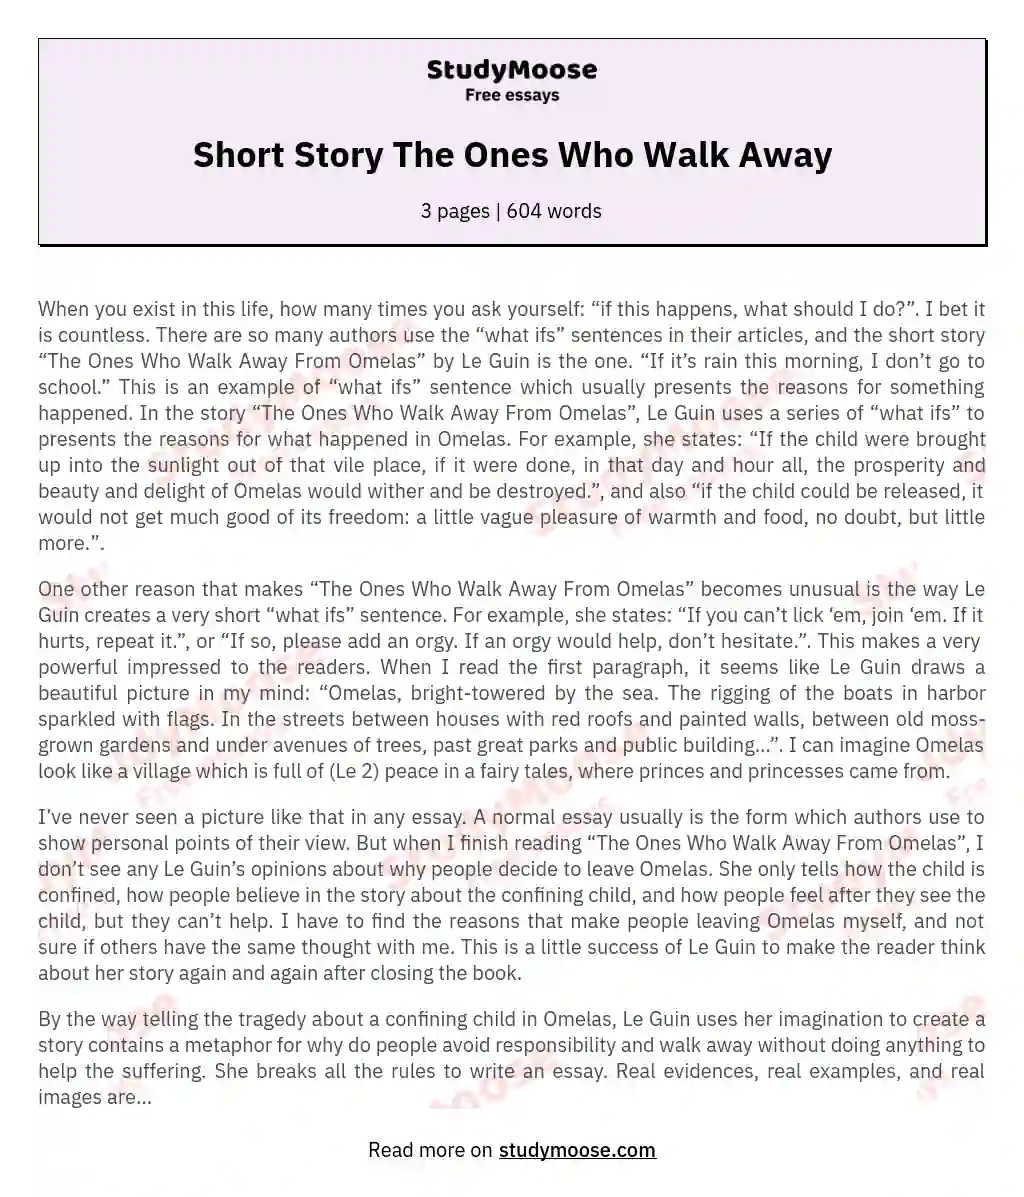 Short Story The Ones Who Walk Away essay